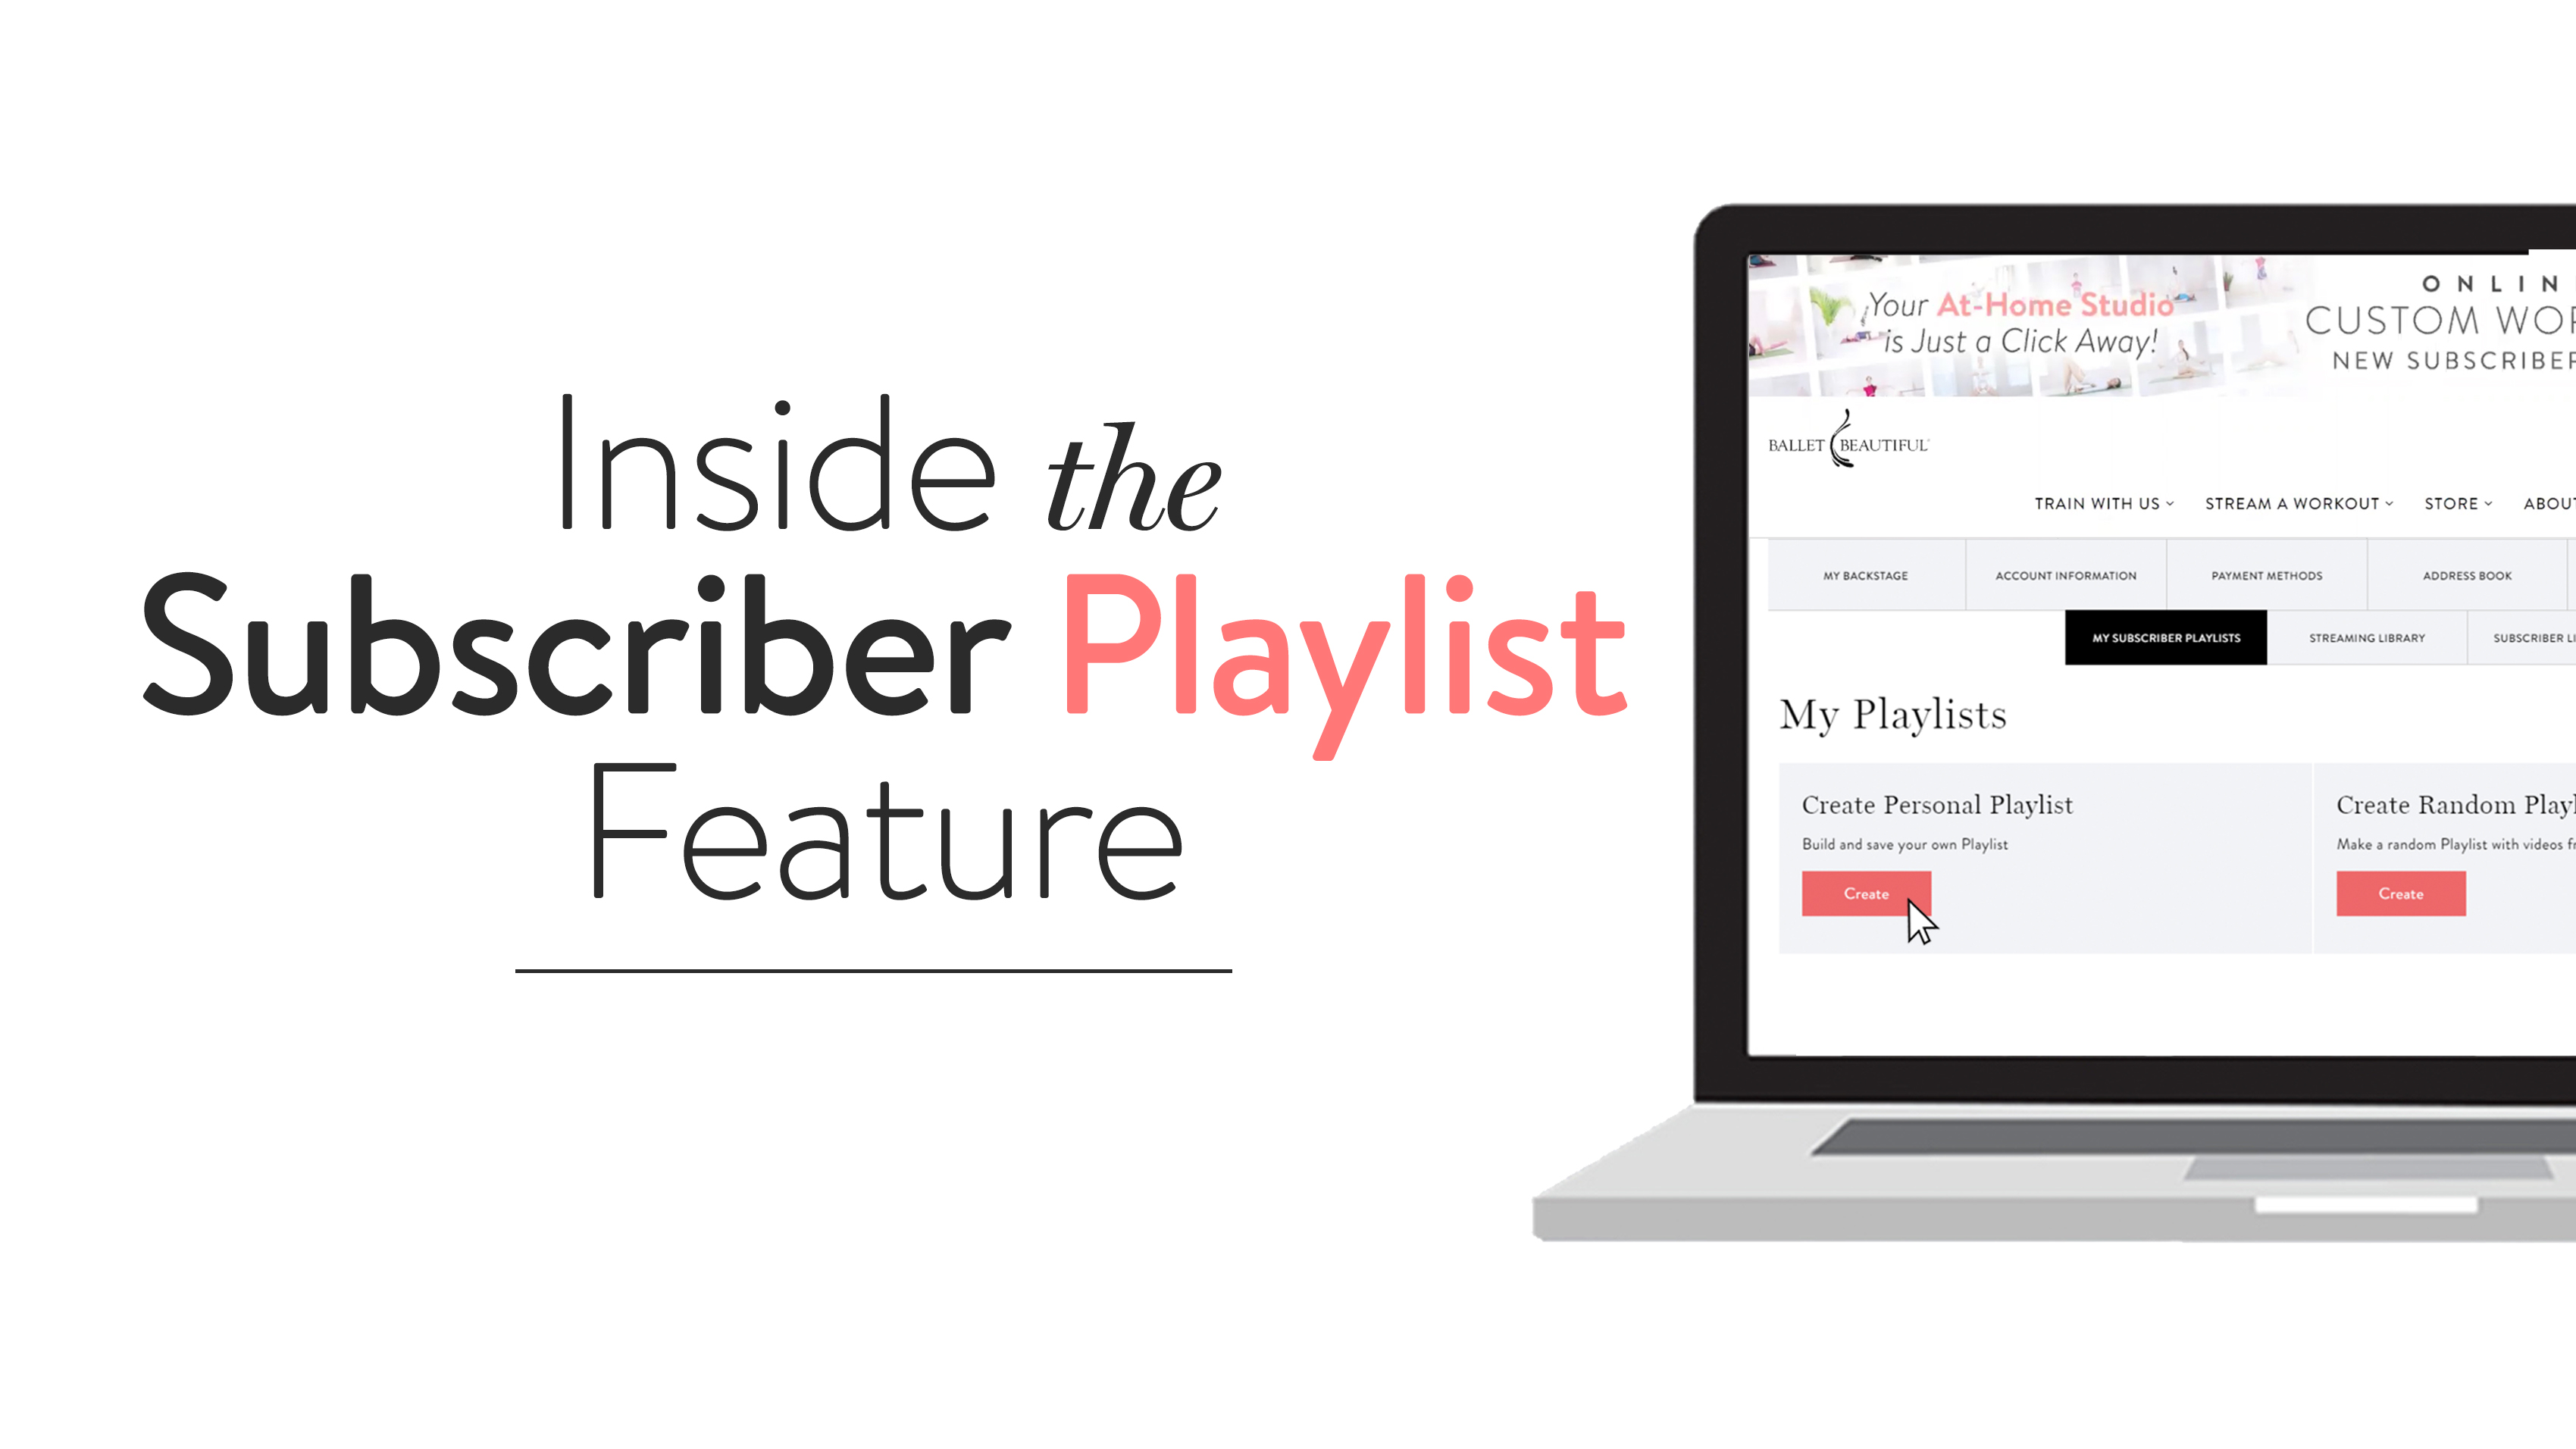 Inside the Subscriber Playlist Feature